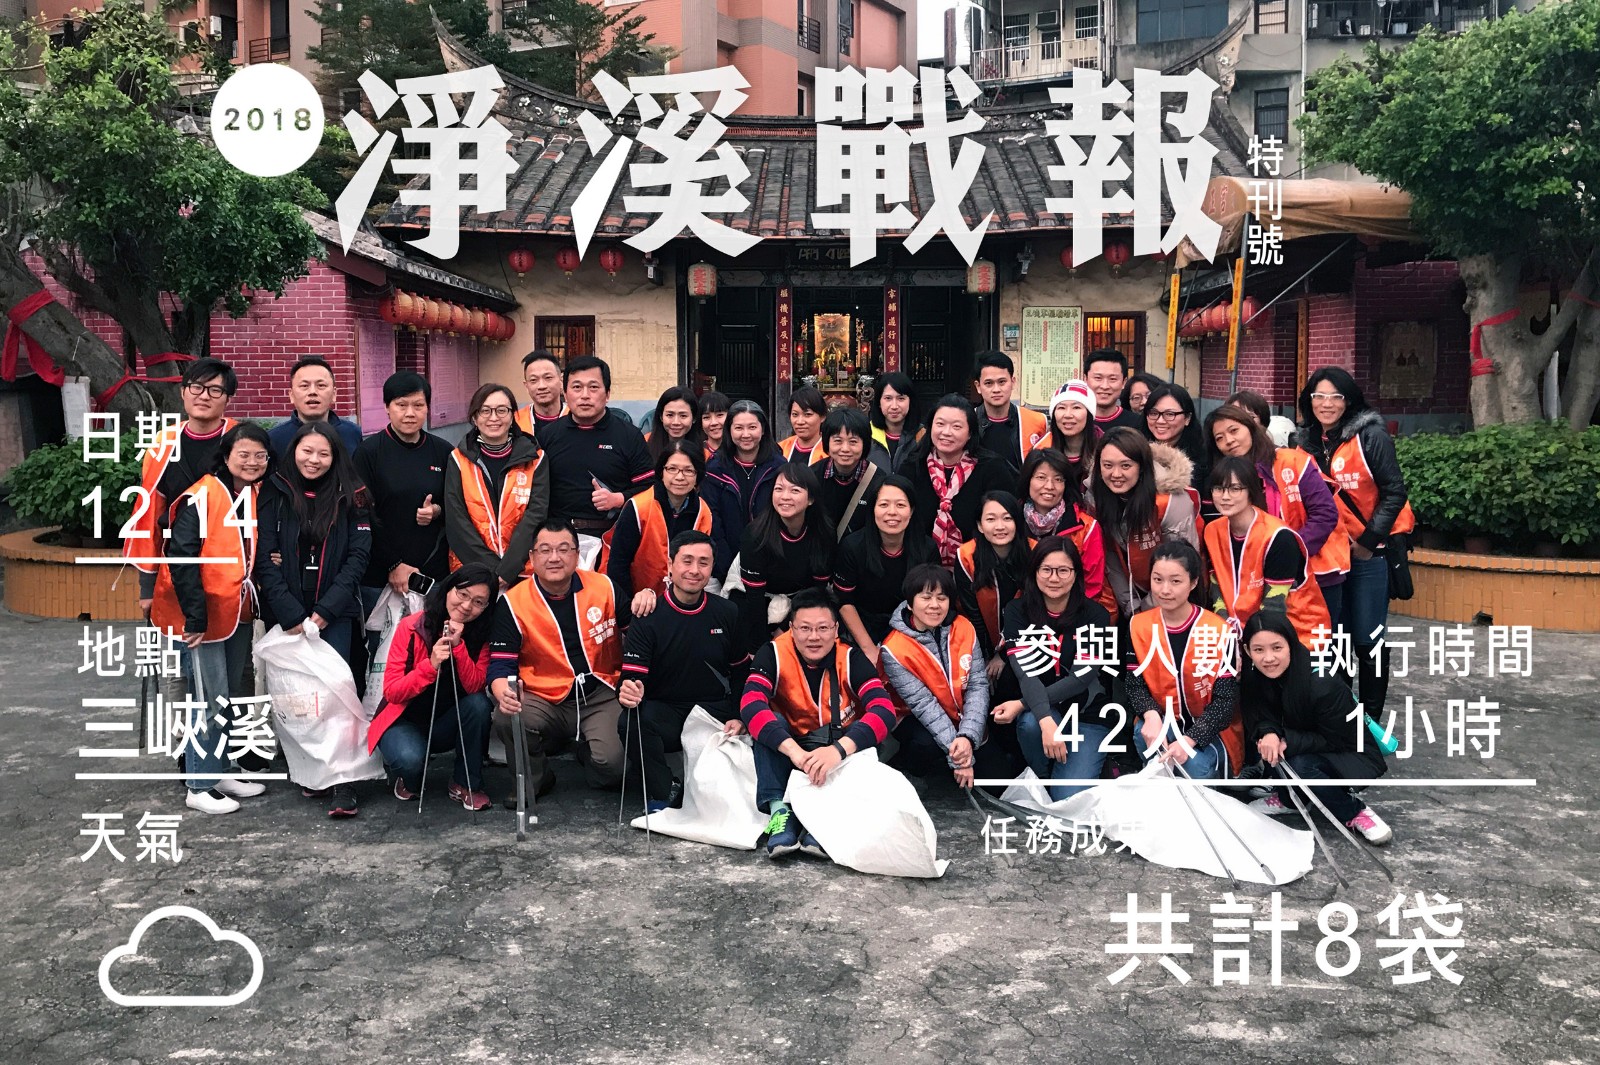 Every month, employees from DBS Bank are encouraged to come to Sanxia to hold volunteer days to protect the land and support local social enterprises. Weather: Cloudy  Number of people: 42  Hours: 1hrs  Achievements: 8 bags of garbage and a tattered sofa  | Taipei Cultural experience | CAN Culture